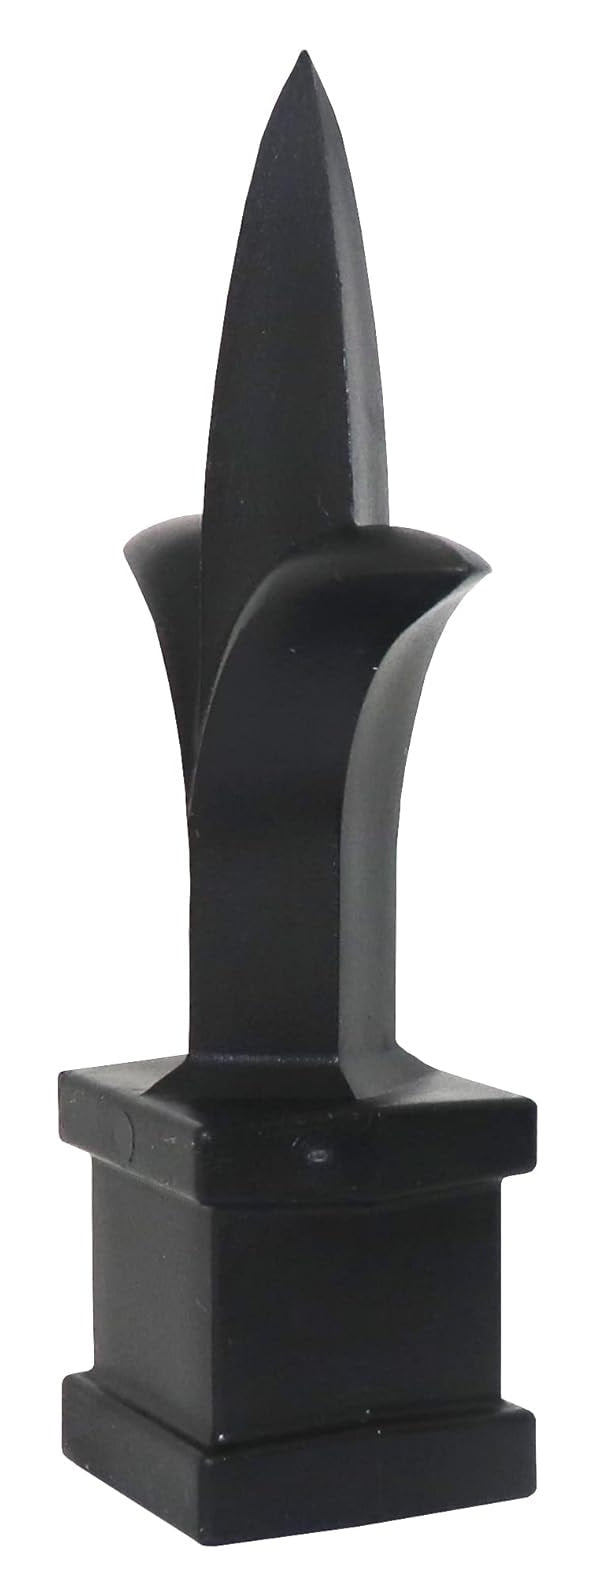 Black Plastic 3/4" Trident Spear Finial Fence Topper for Wrought Iron Picket Fence 0.75" posts